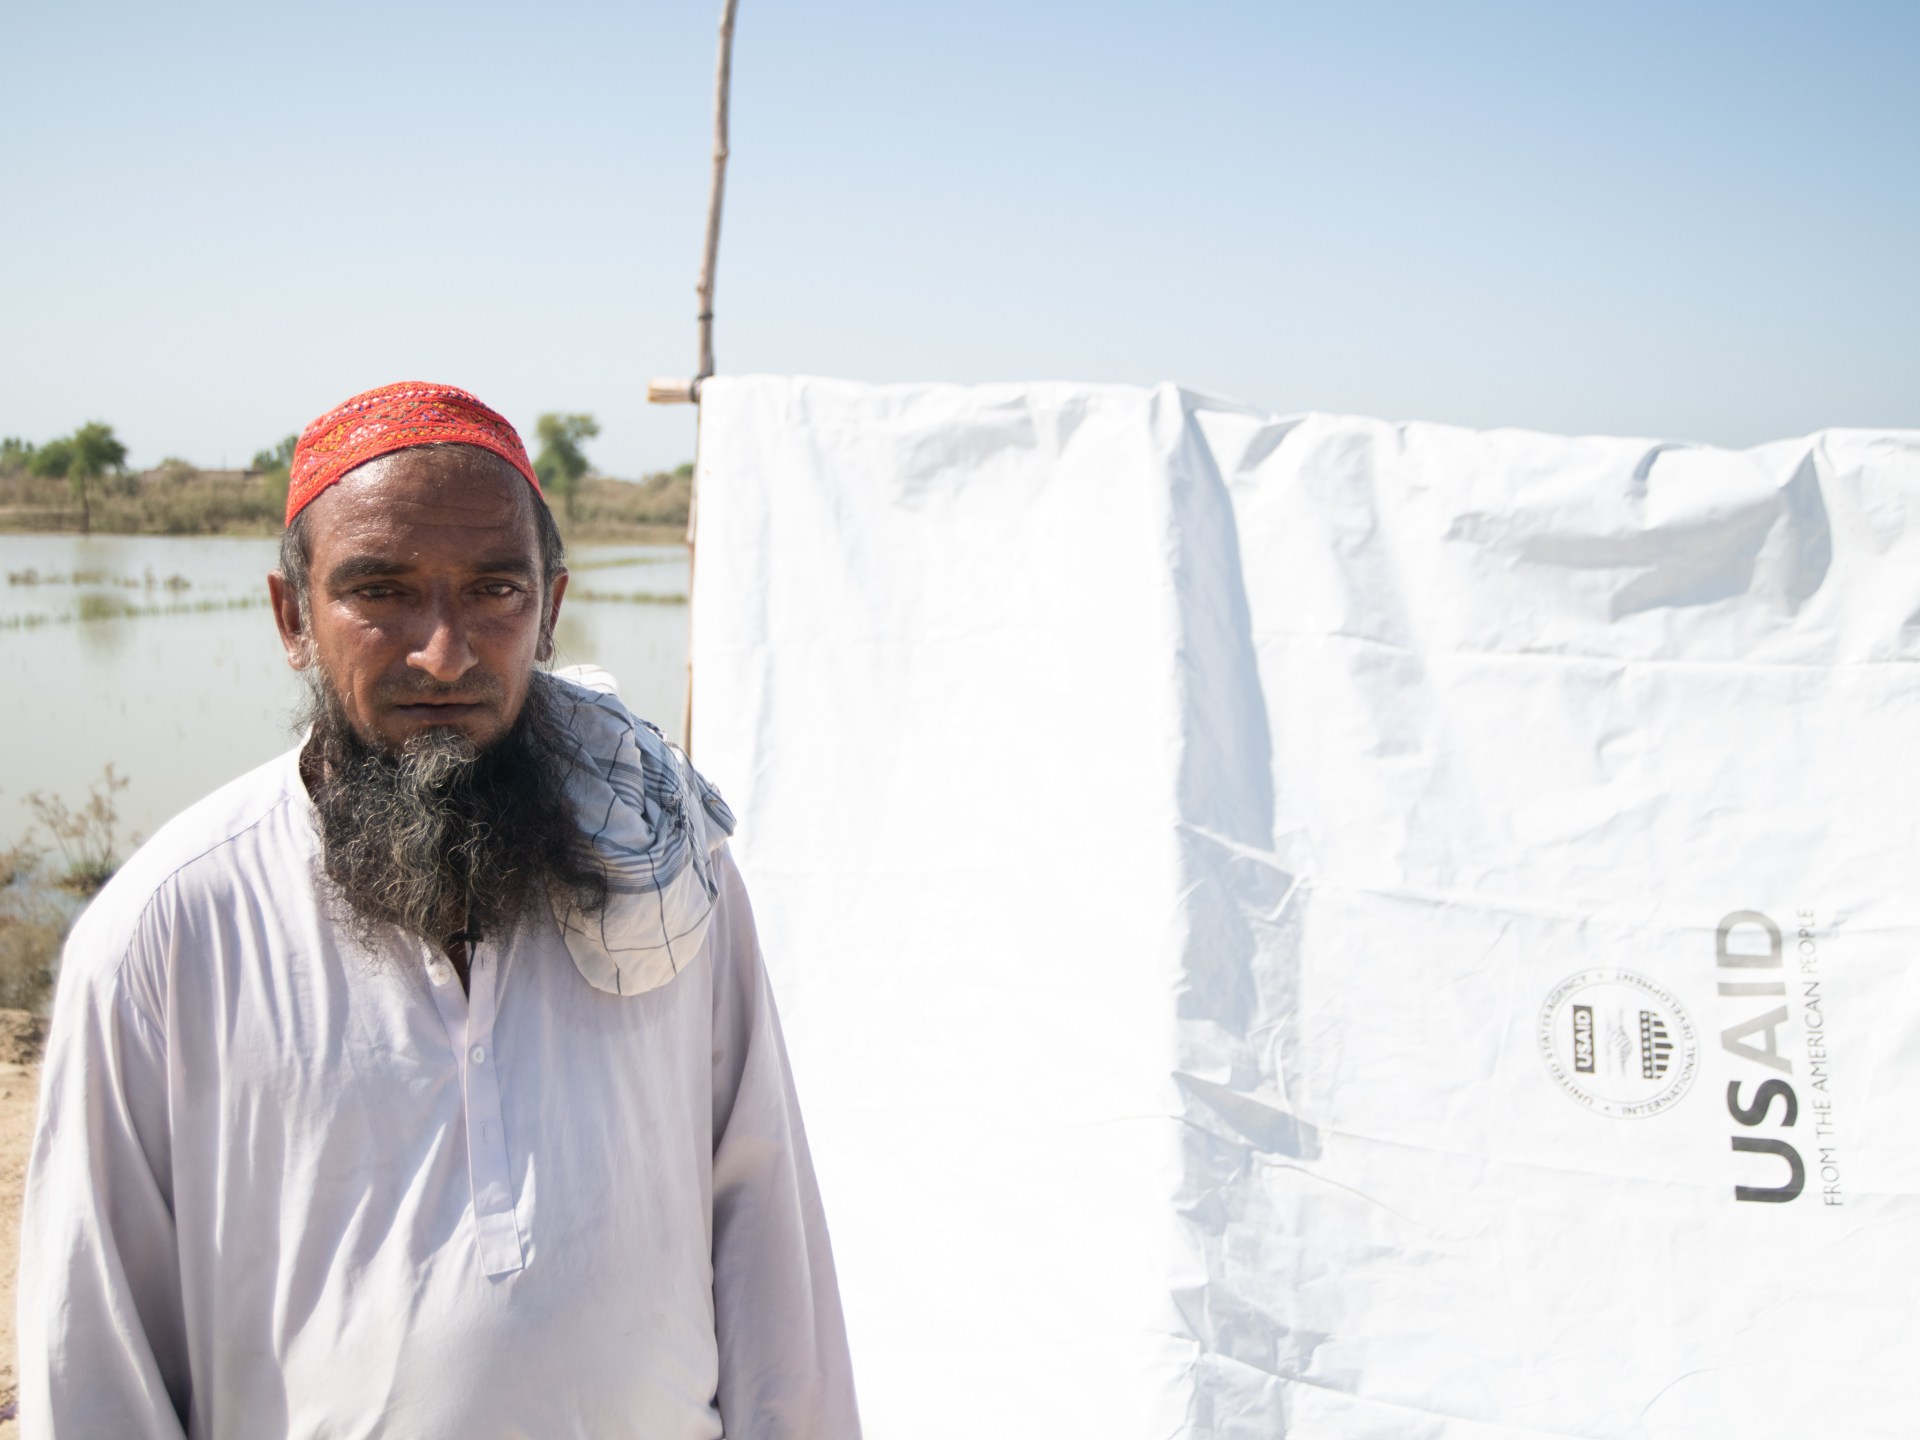 Photos: Over a year after Pakistan floods, survivors battle climate anxiety